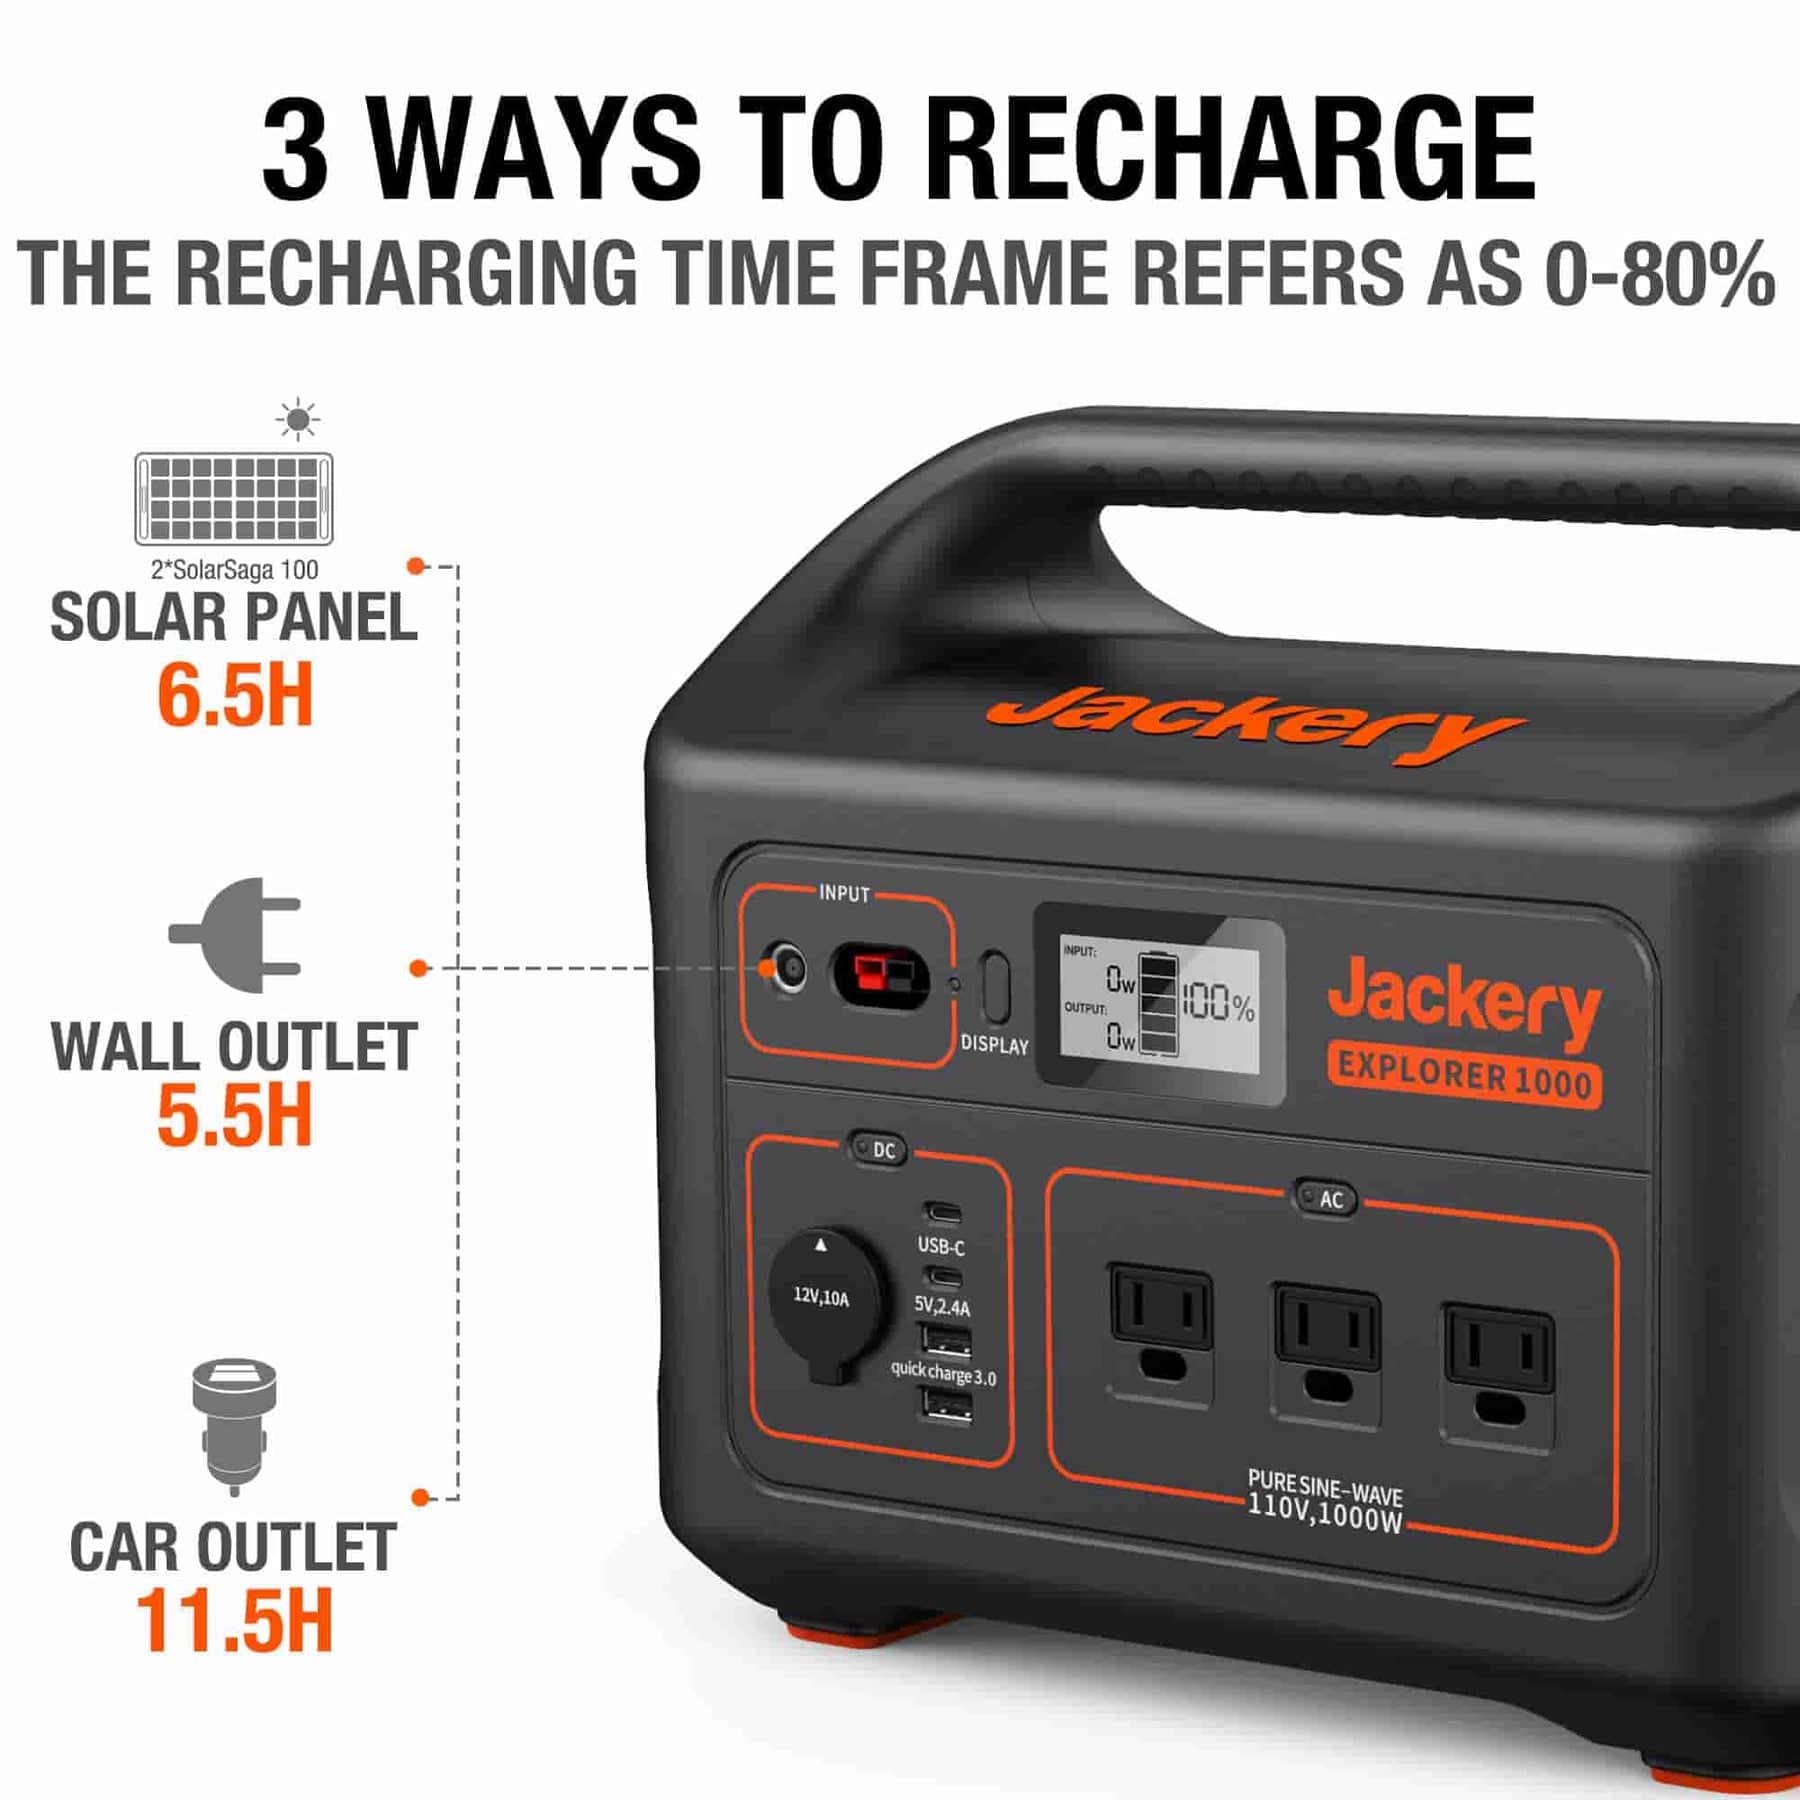 Pros and Cons Of Jackery Explorer 1000 Portable Power Station